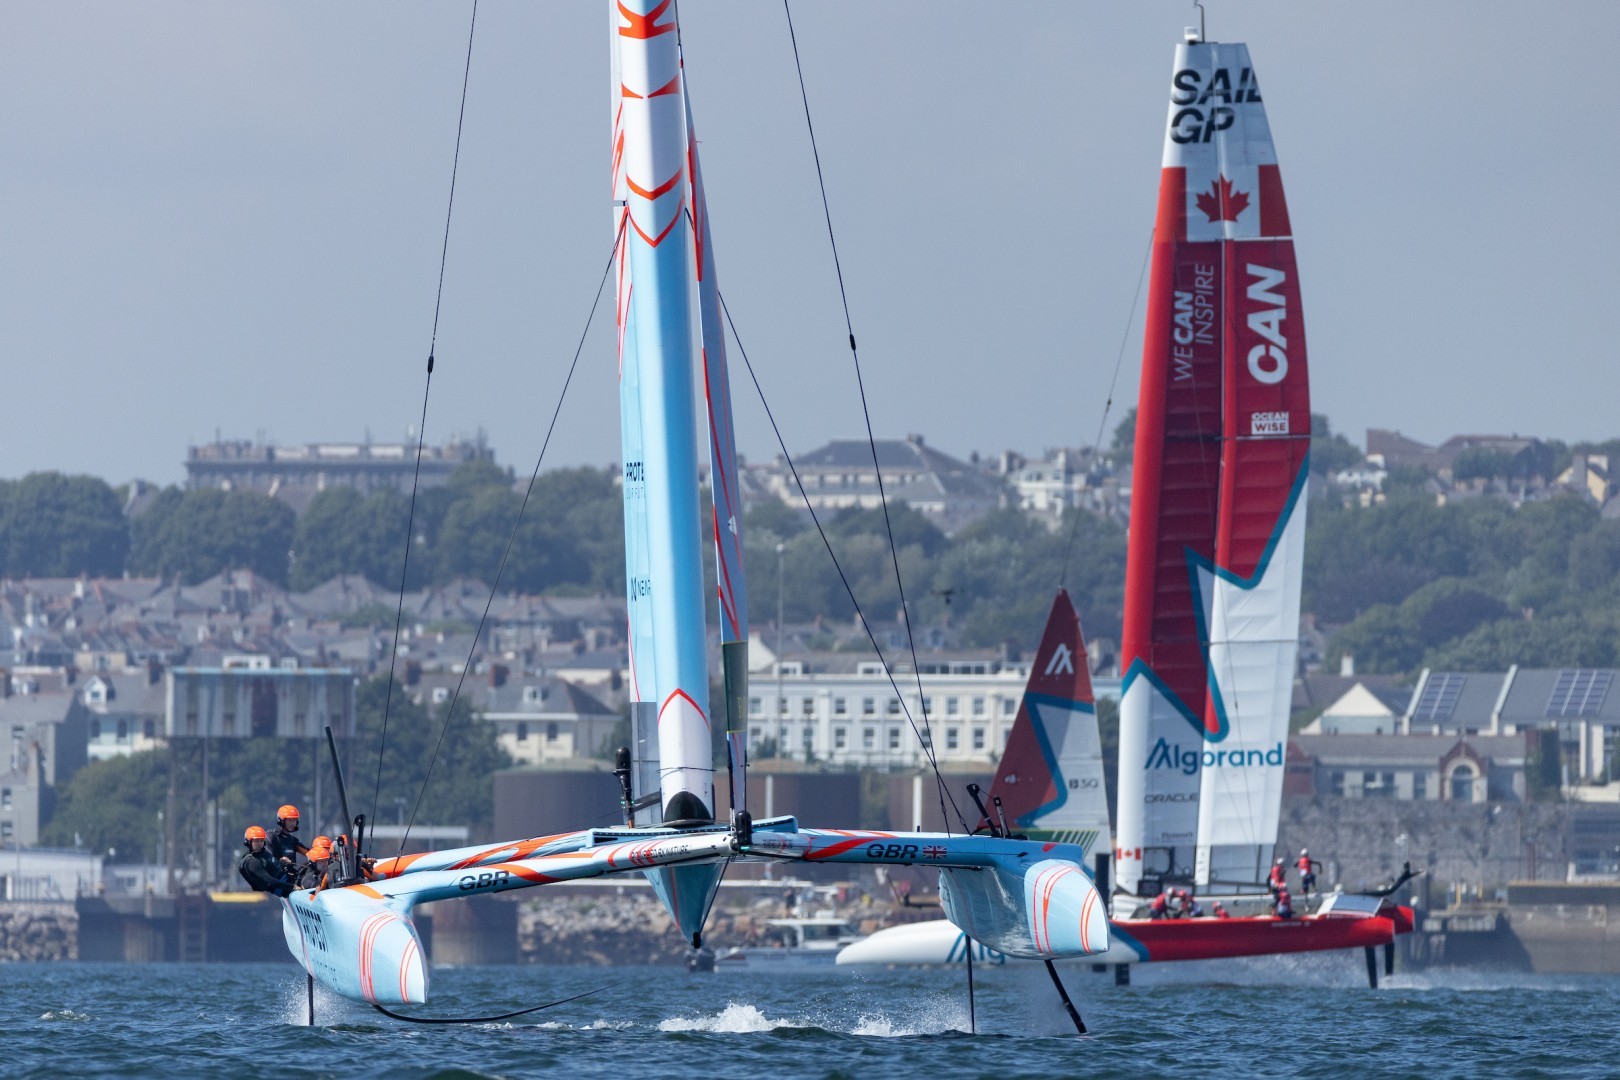 Sir Ben Ainslie looks to kickstart season with win on home waters in Plymouth